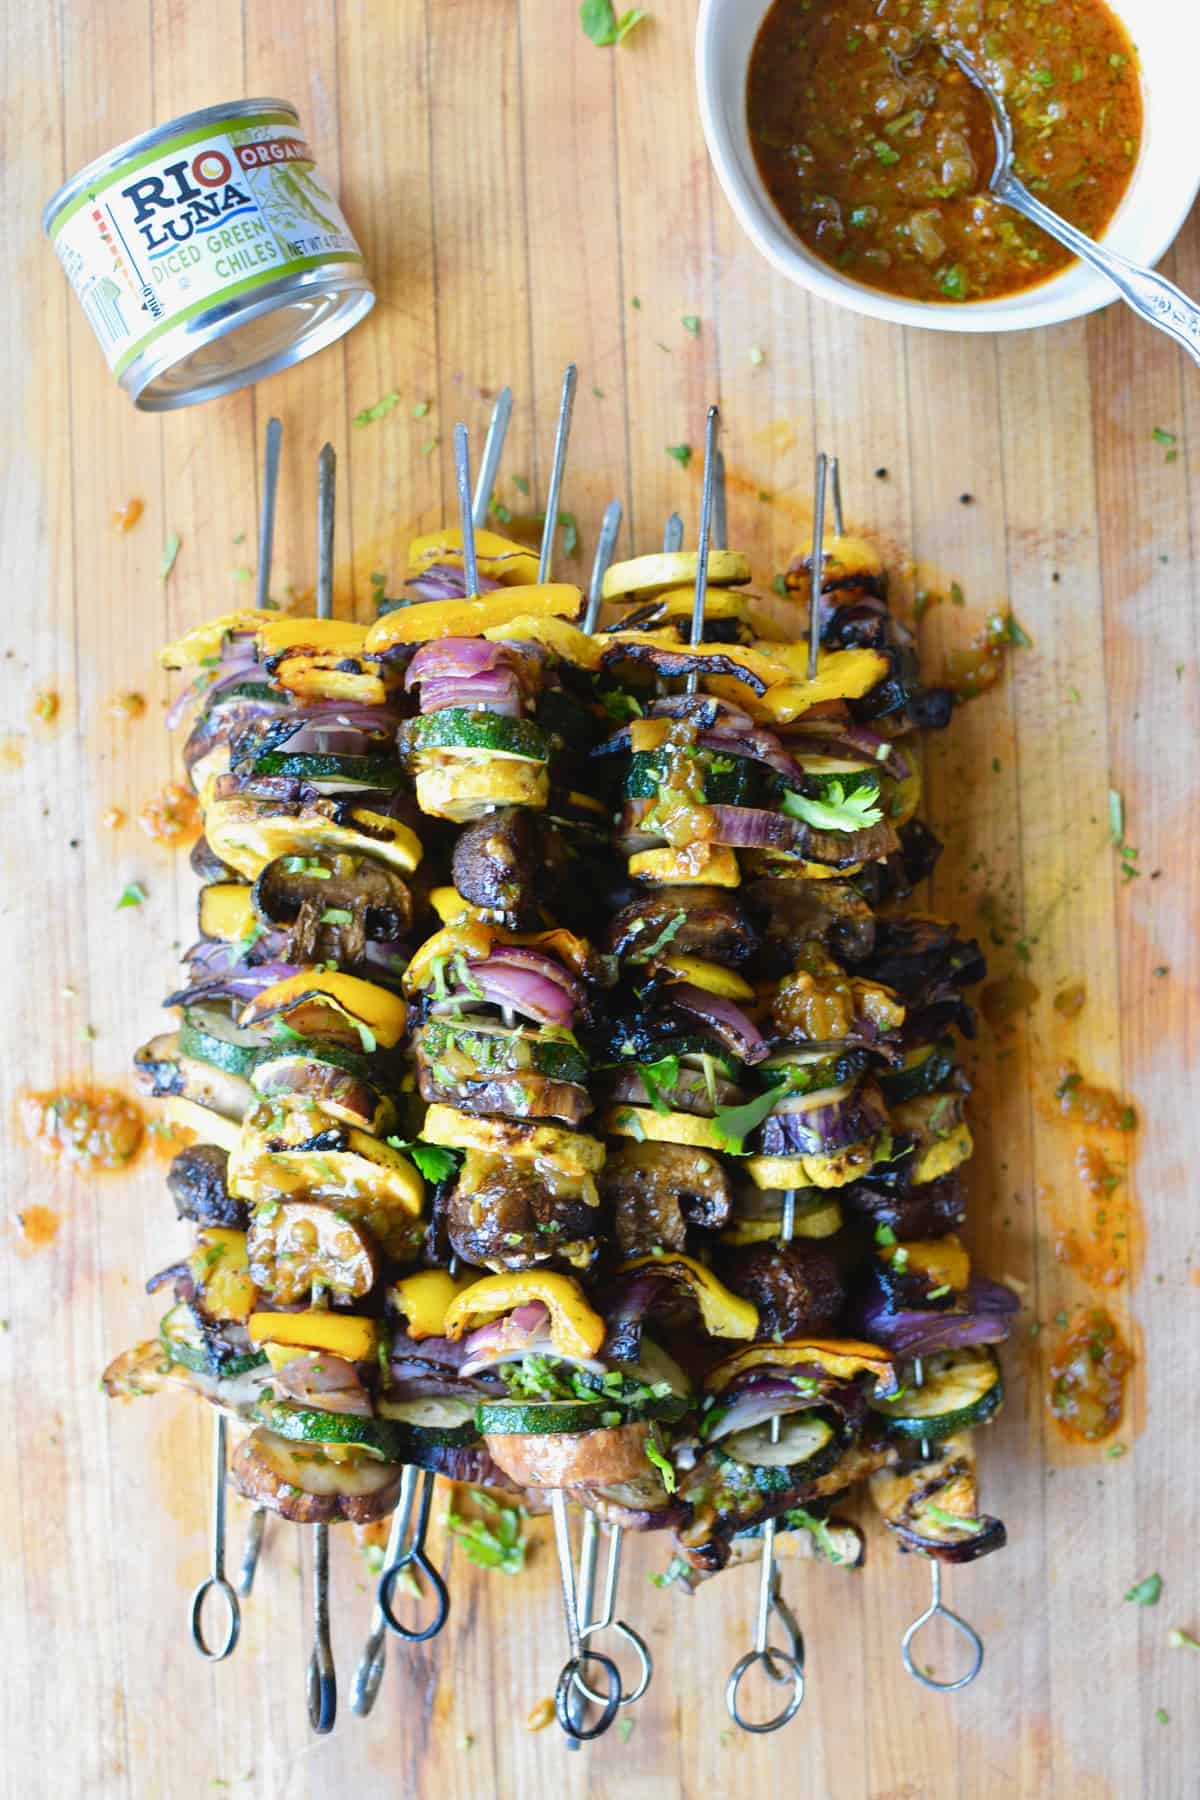 Grilled veggie skewers are the perfect way to celebrate summer produce, especially when drizzled with a smoky green chile vinaigrette! #skewers #vegandinner #grilledvegetables #greenchiles #ad #holajalapeno